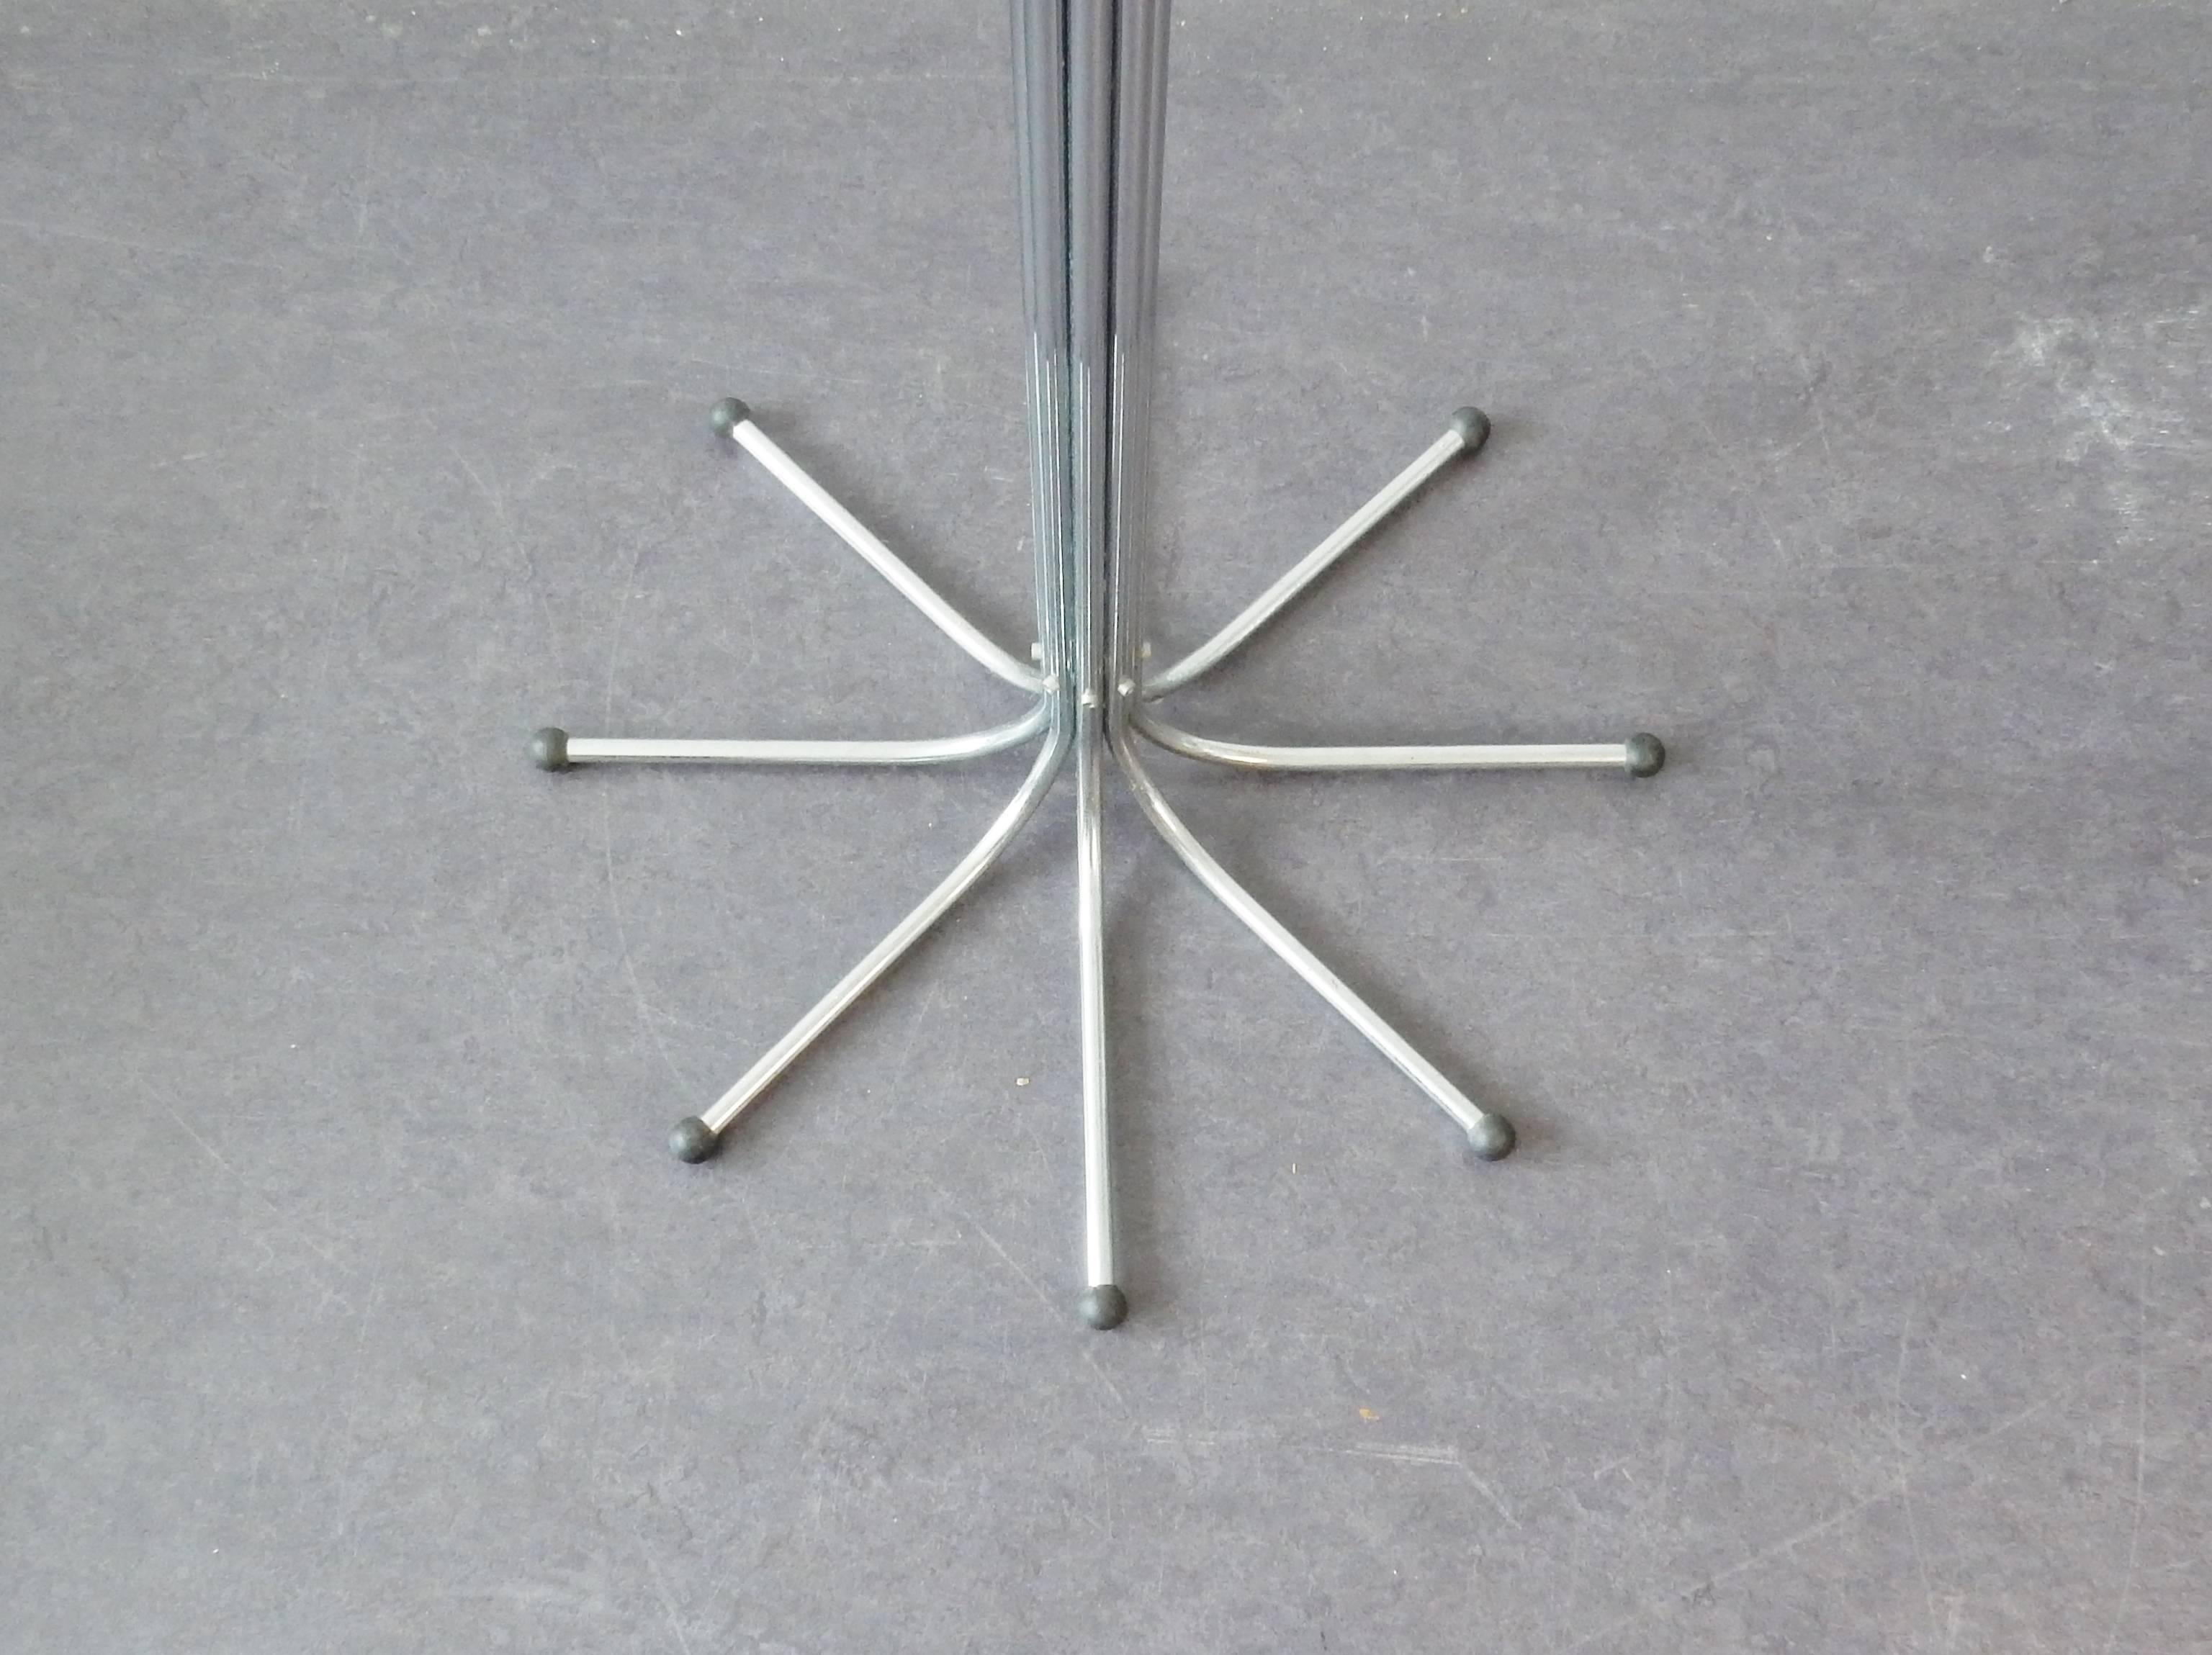 Coat rack inspired on a tree. 8 chrome metal pipes connected make a tree with 8 branches and a solid base of 8 roots. Each branch has 2 extra knobs and this makes it a very extensive coat stand. 
A design by Sidse Werner for Fritz Hansen from 1971.